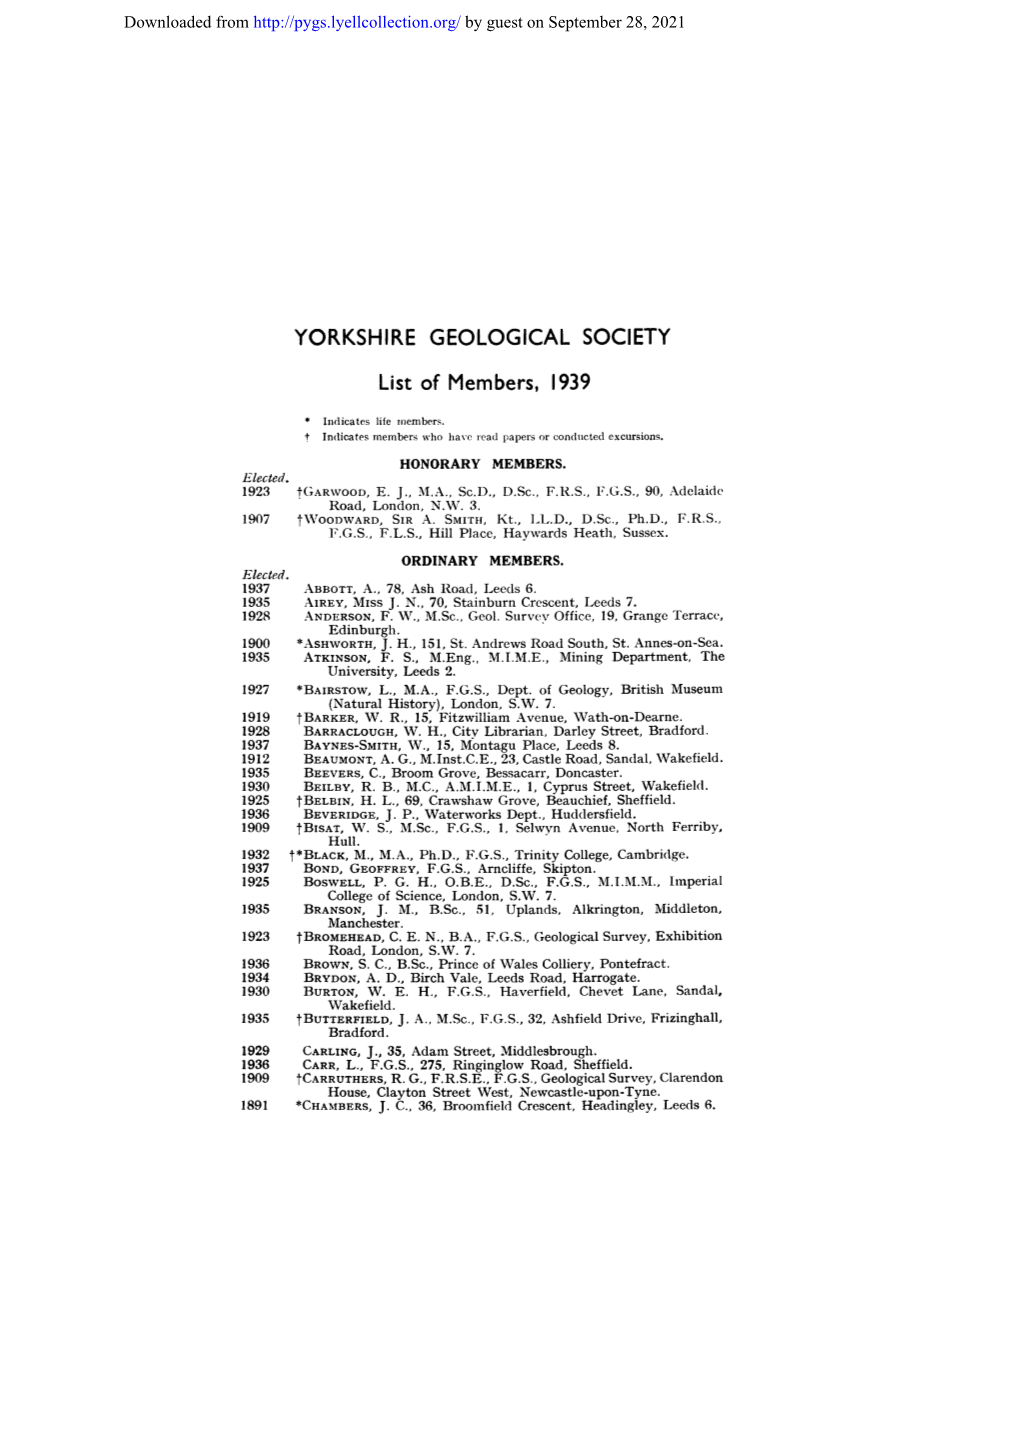 YORKSHIRE GEOLOGICAL SOCIETY List of Members, 1939